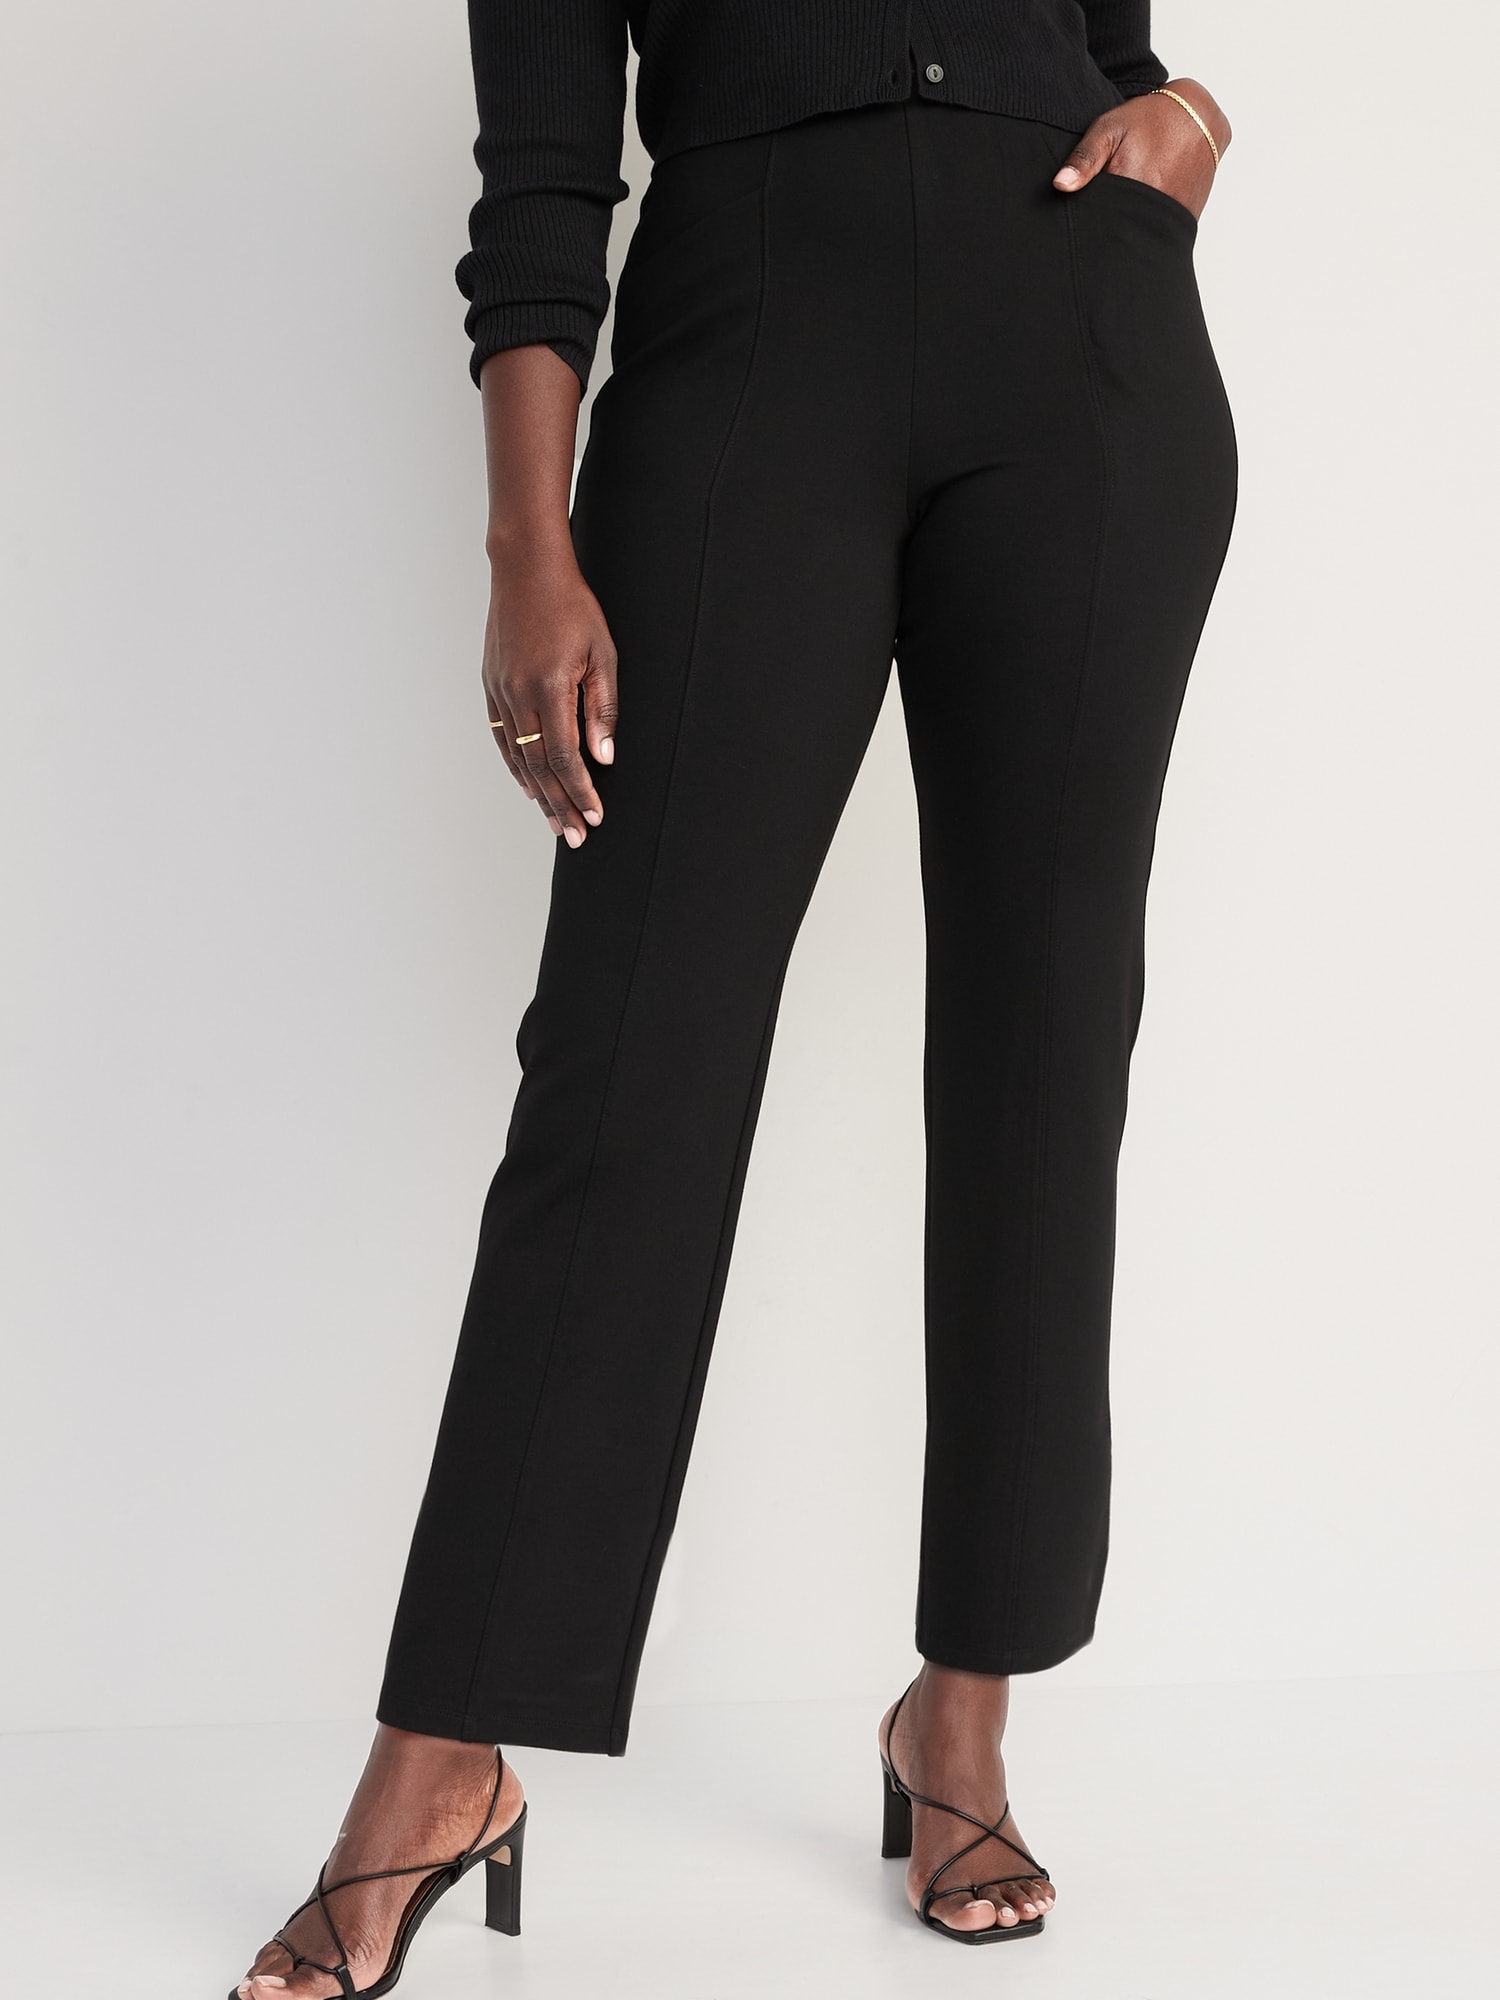 Croft Barrow Effortless Stretch Ankle Pants and 50 similar items